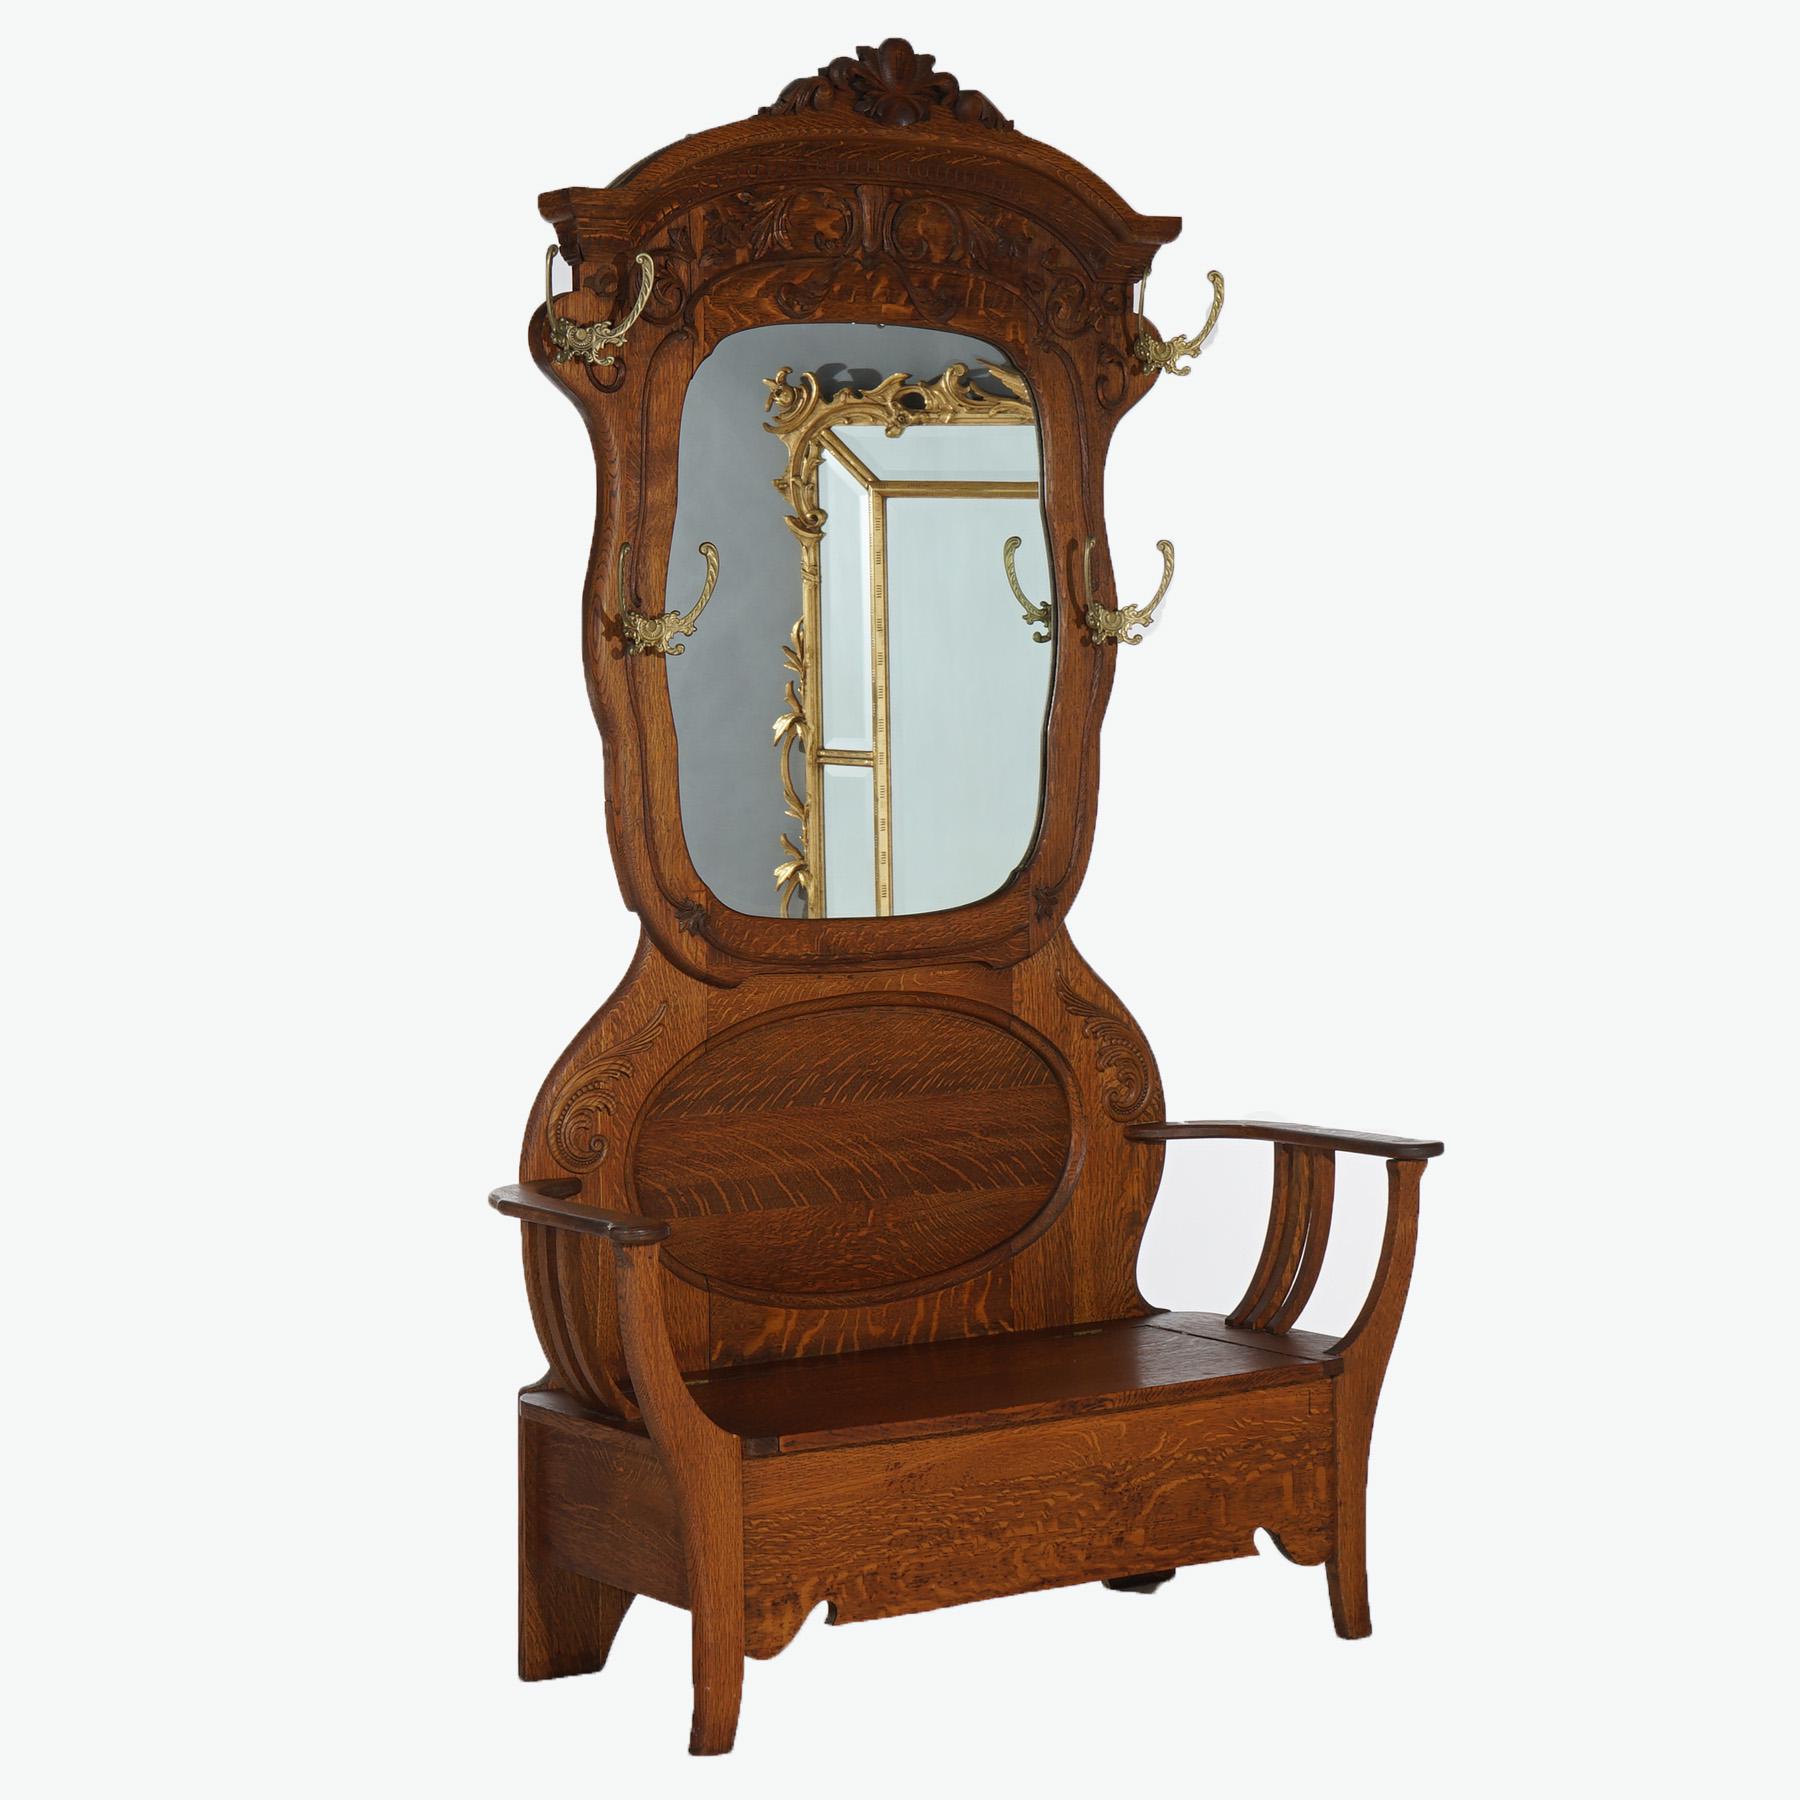 A large R J Horner hall seat offers quarter sawn oak construction with foliate carved crest over shaped mirror, seat with lift top, circa 1900
 
Measures - 79